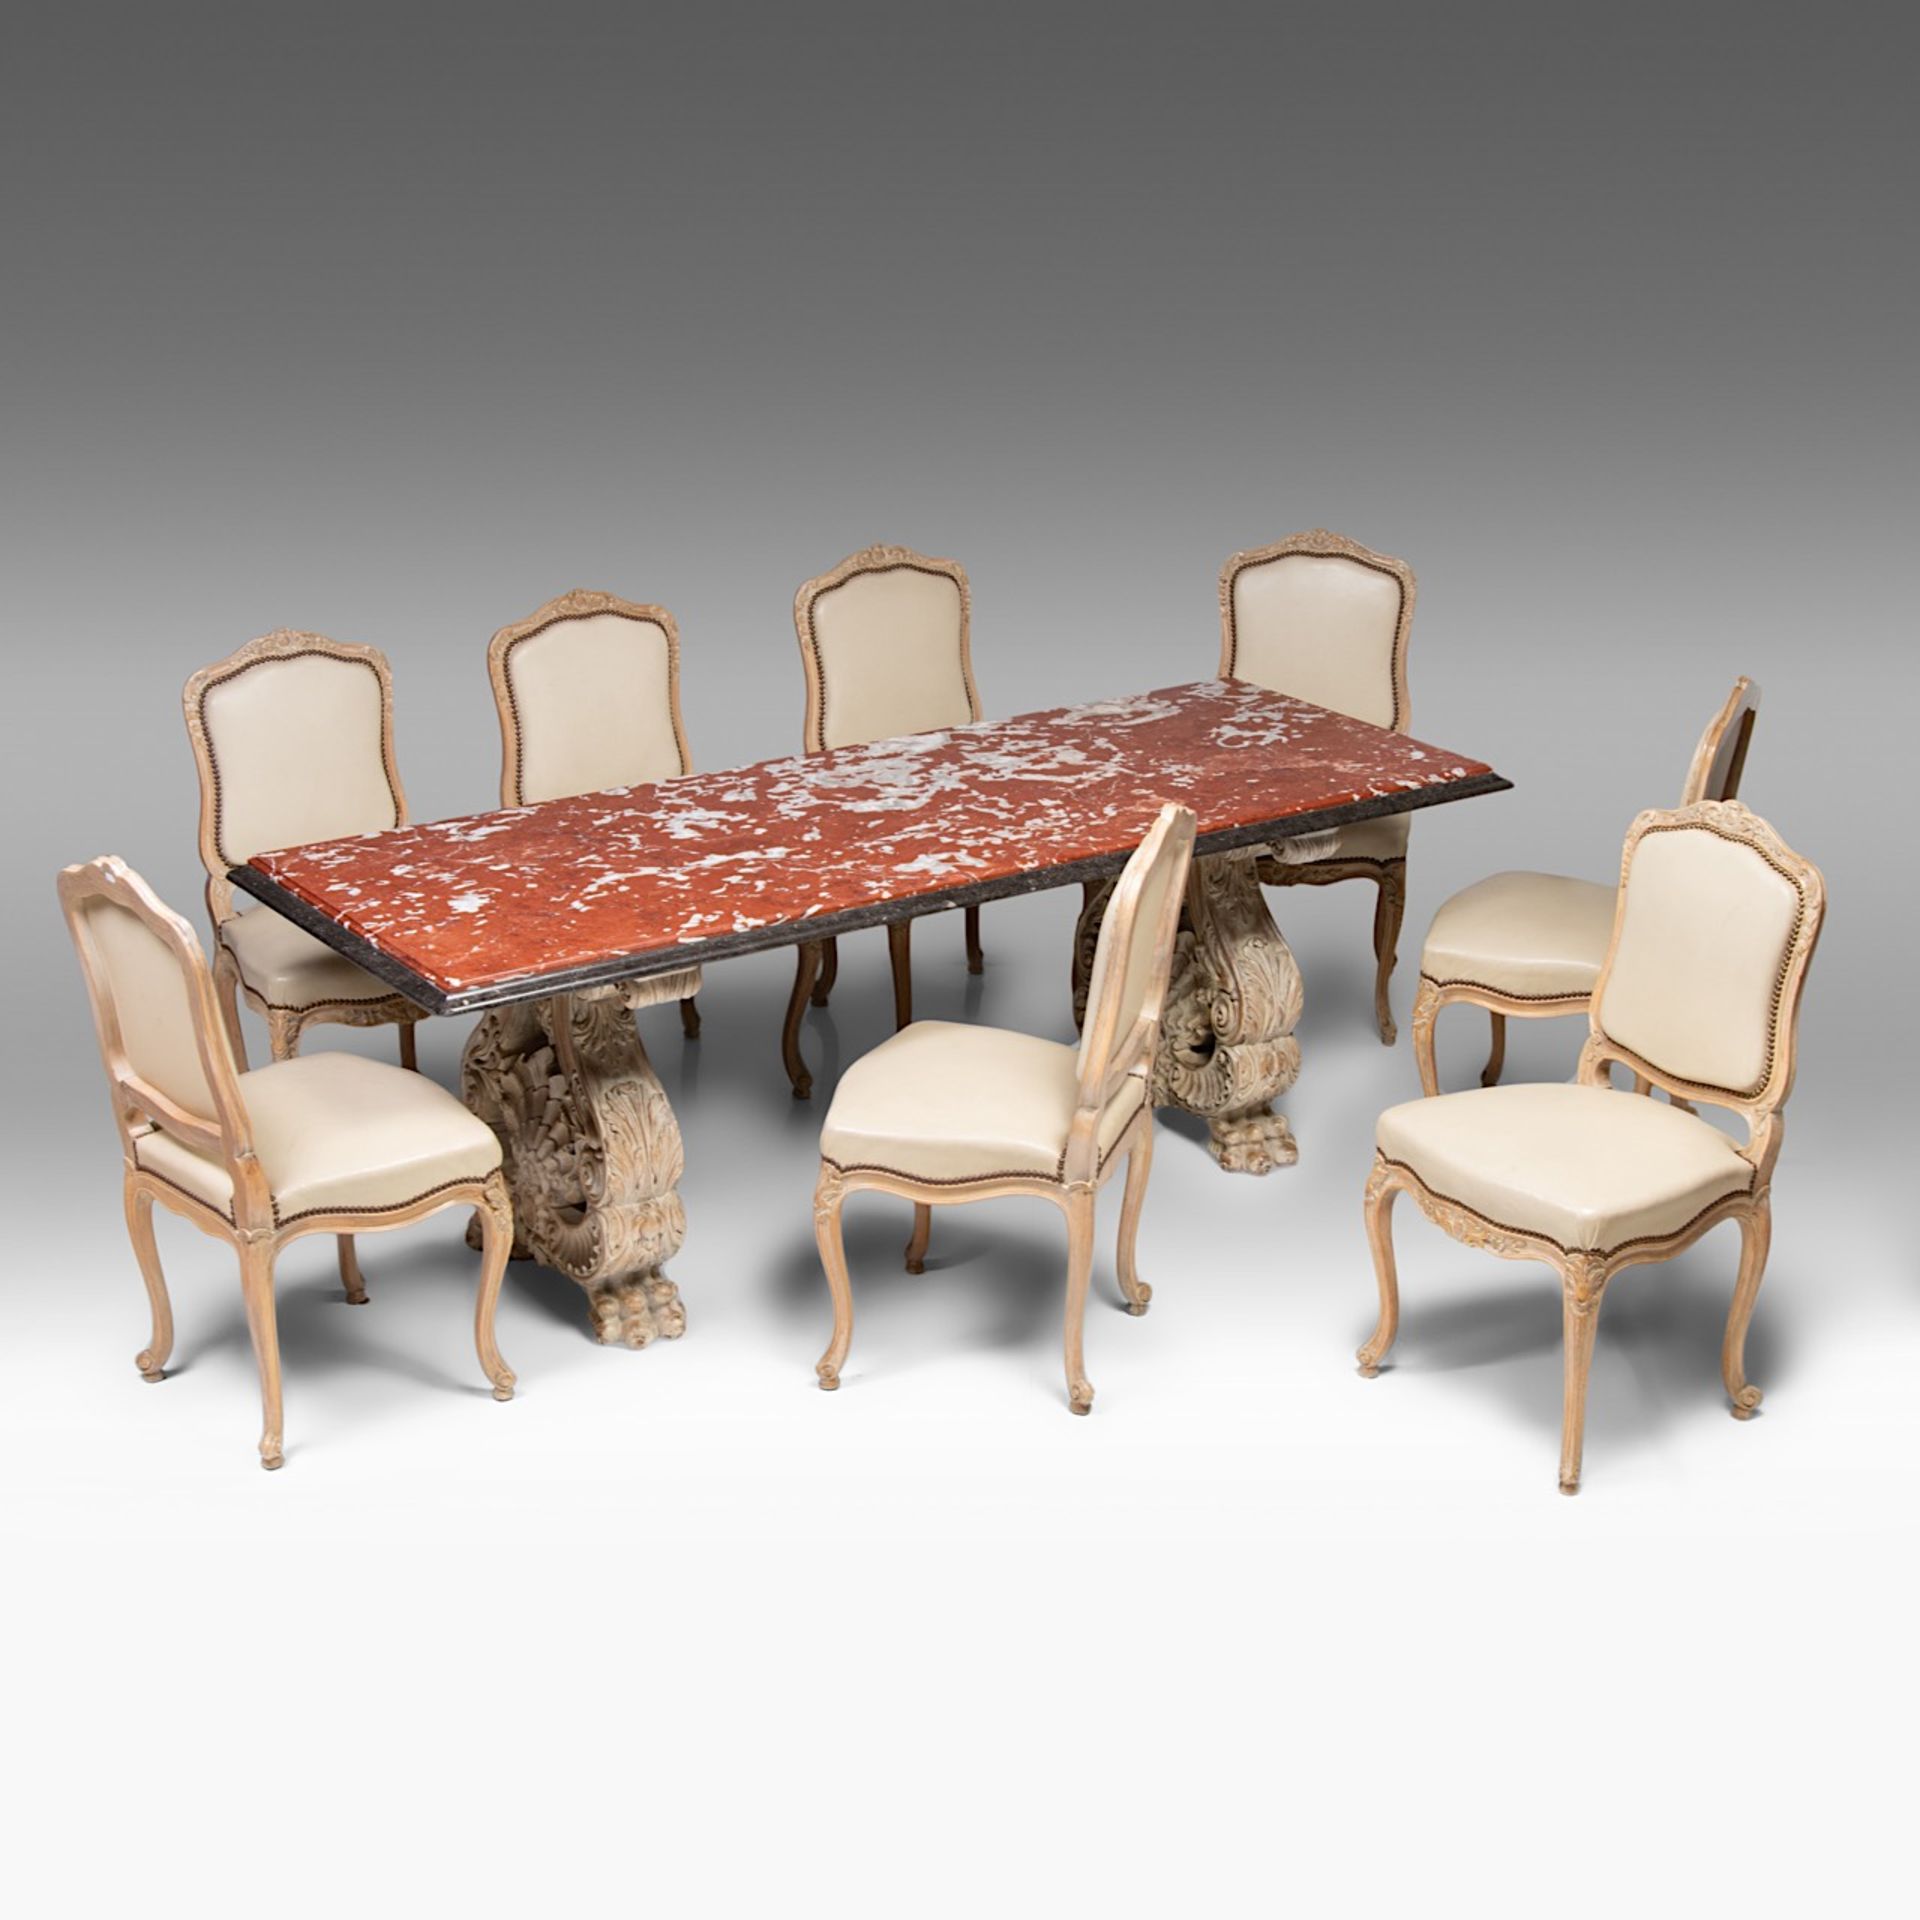 A Renaissance-style marble-topped table with sculpted wood trestles, H 76 cm - W 219 cm - D 84 cm